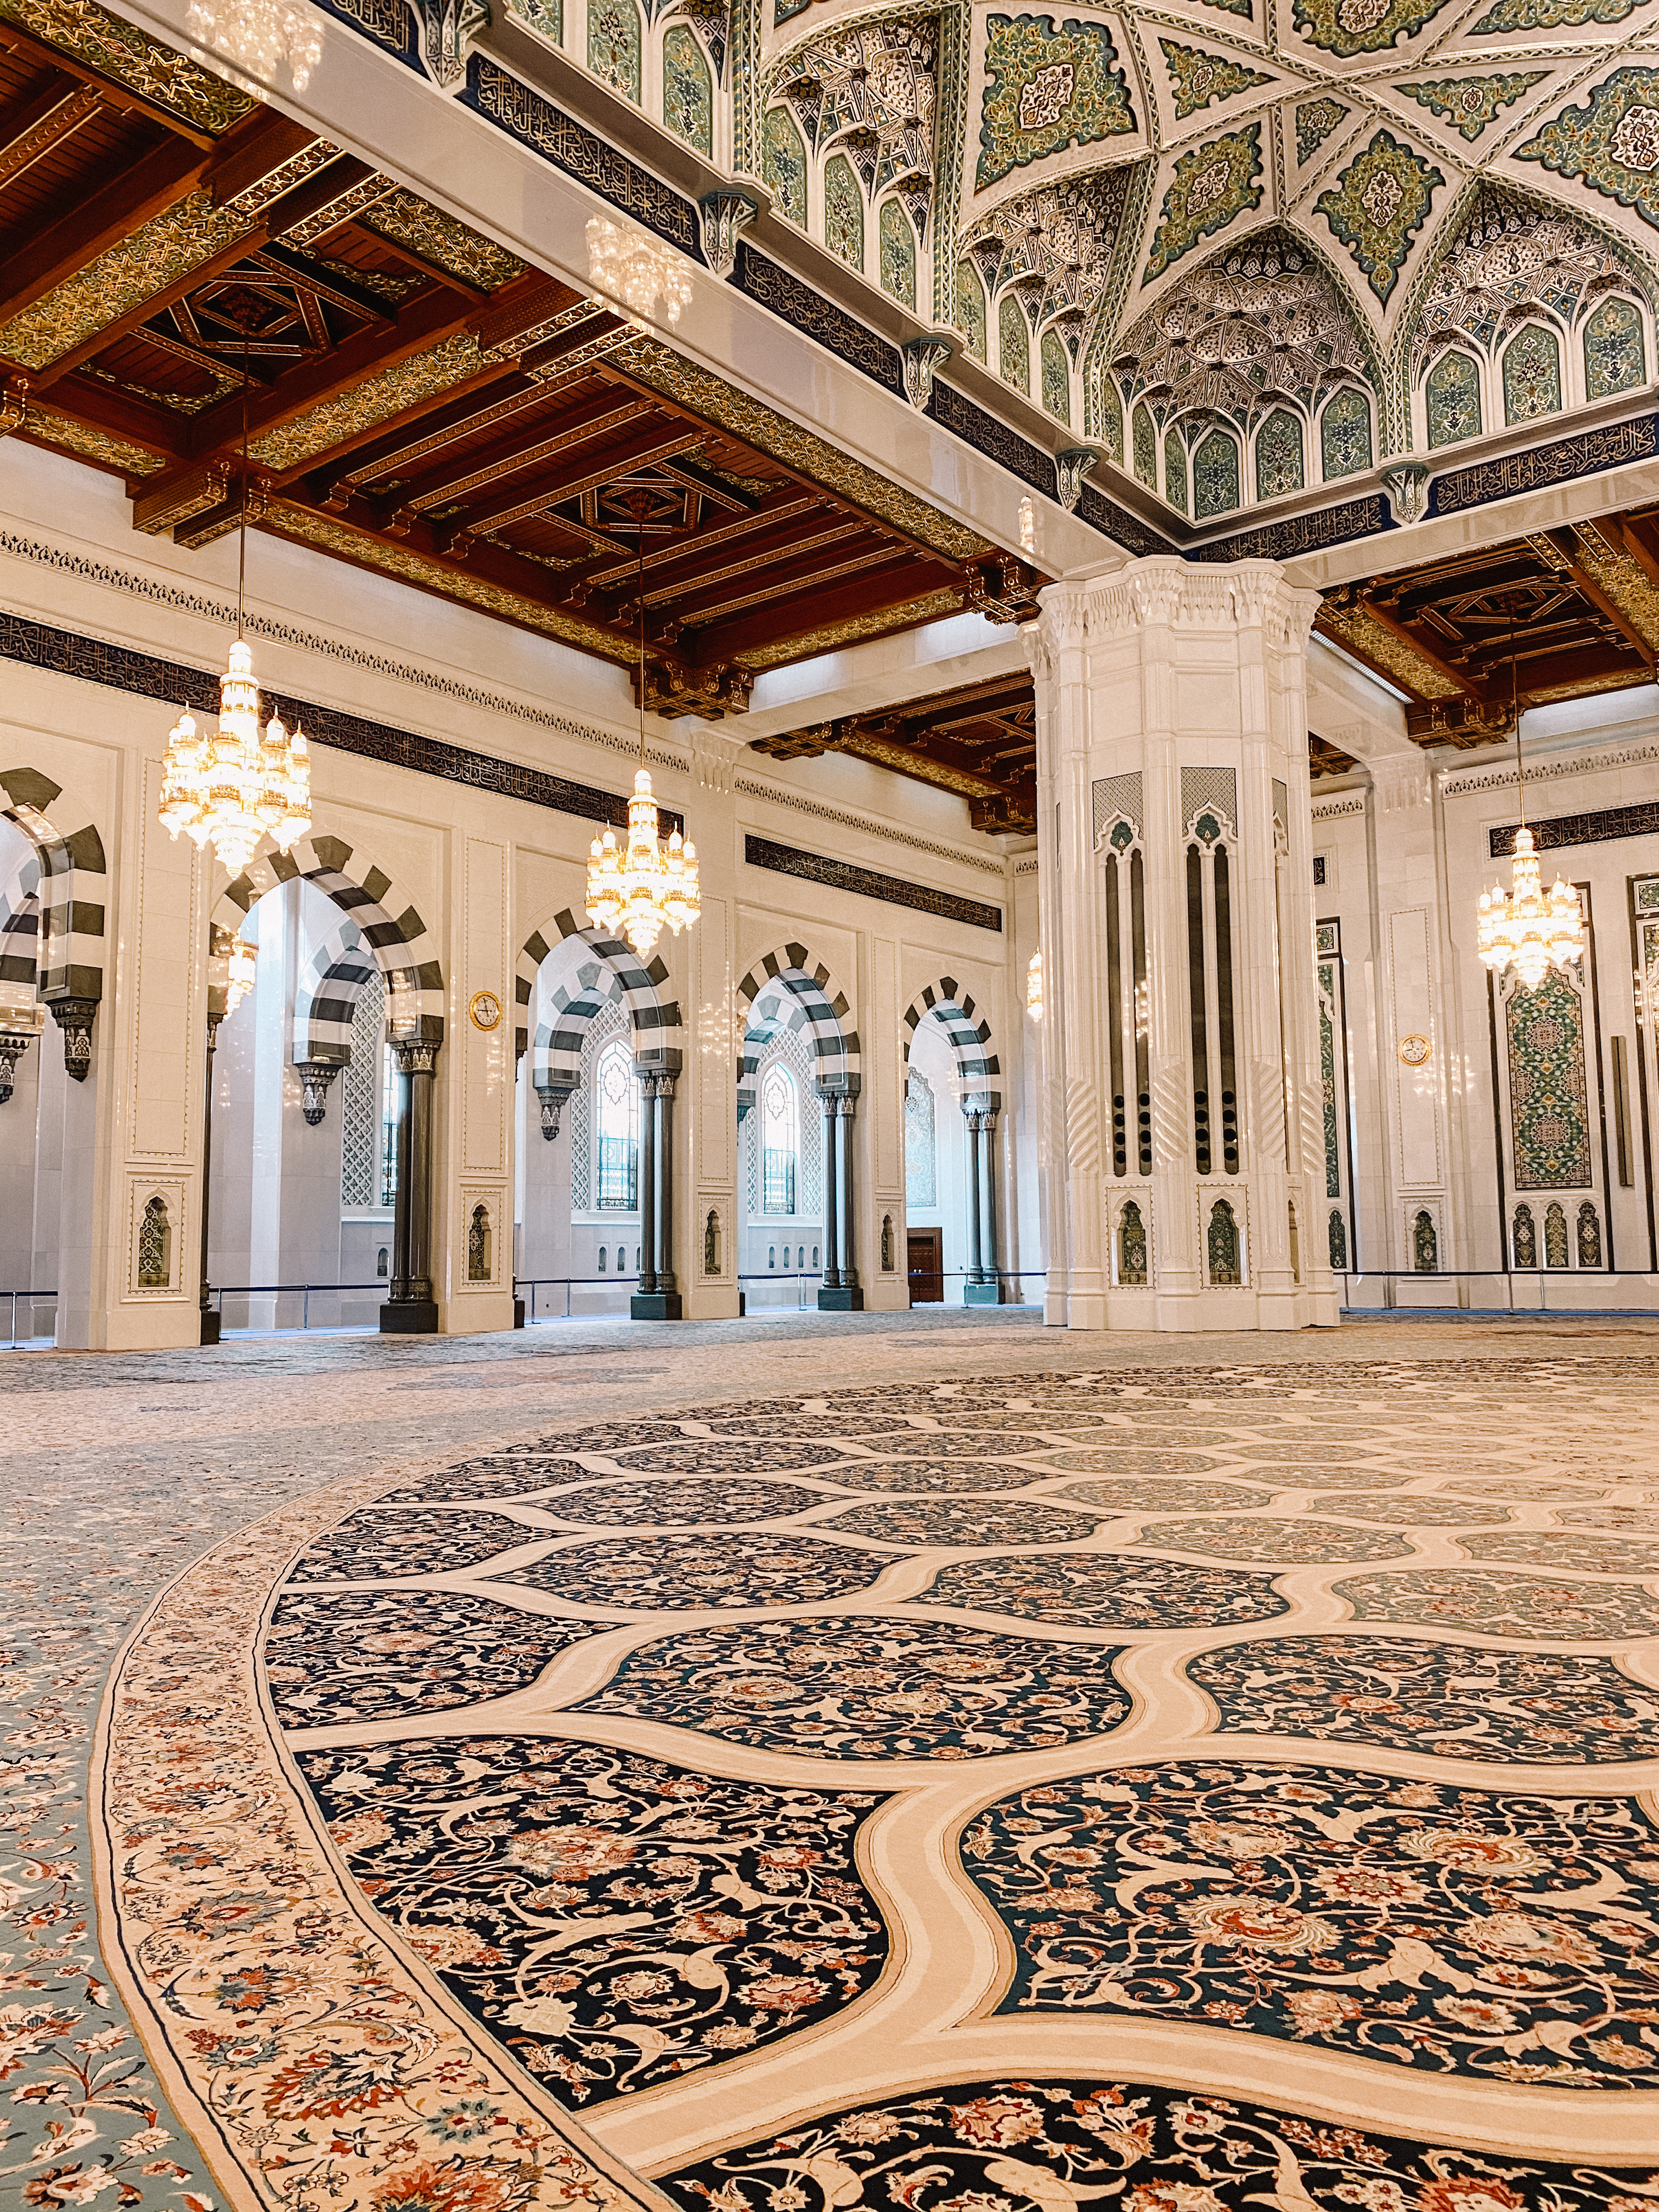 Intricately handwoven carpet in the Sultan Qaboos Mosque central prayer hall 